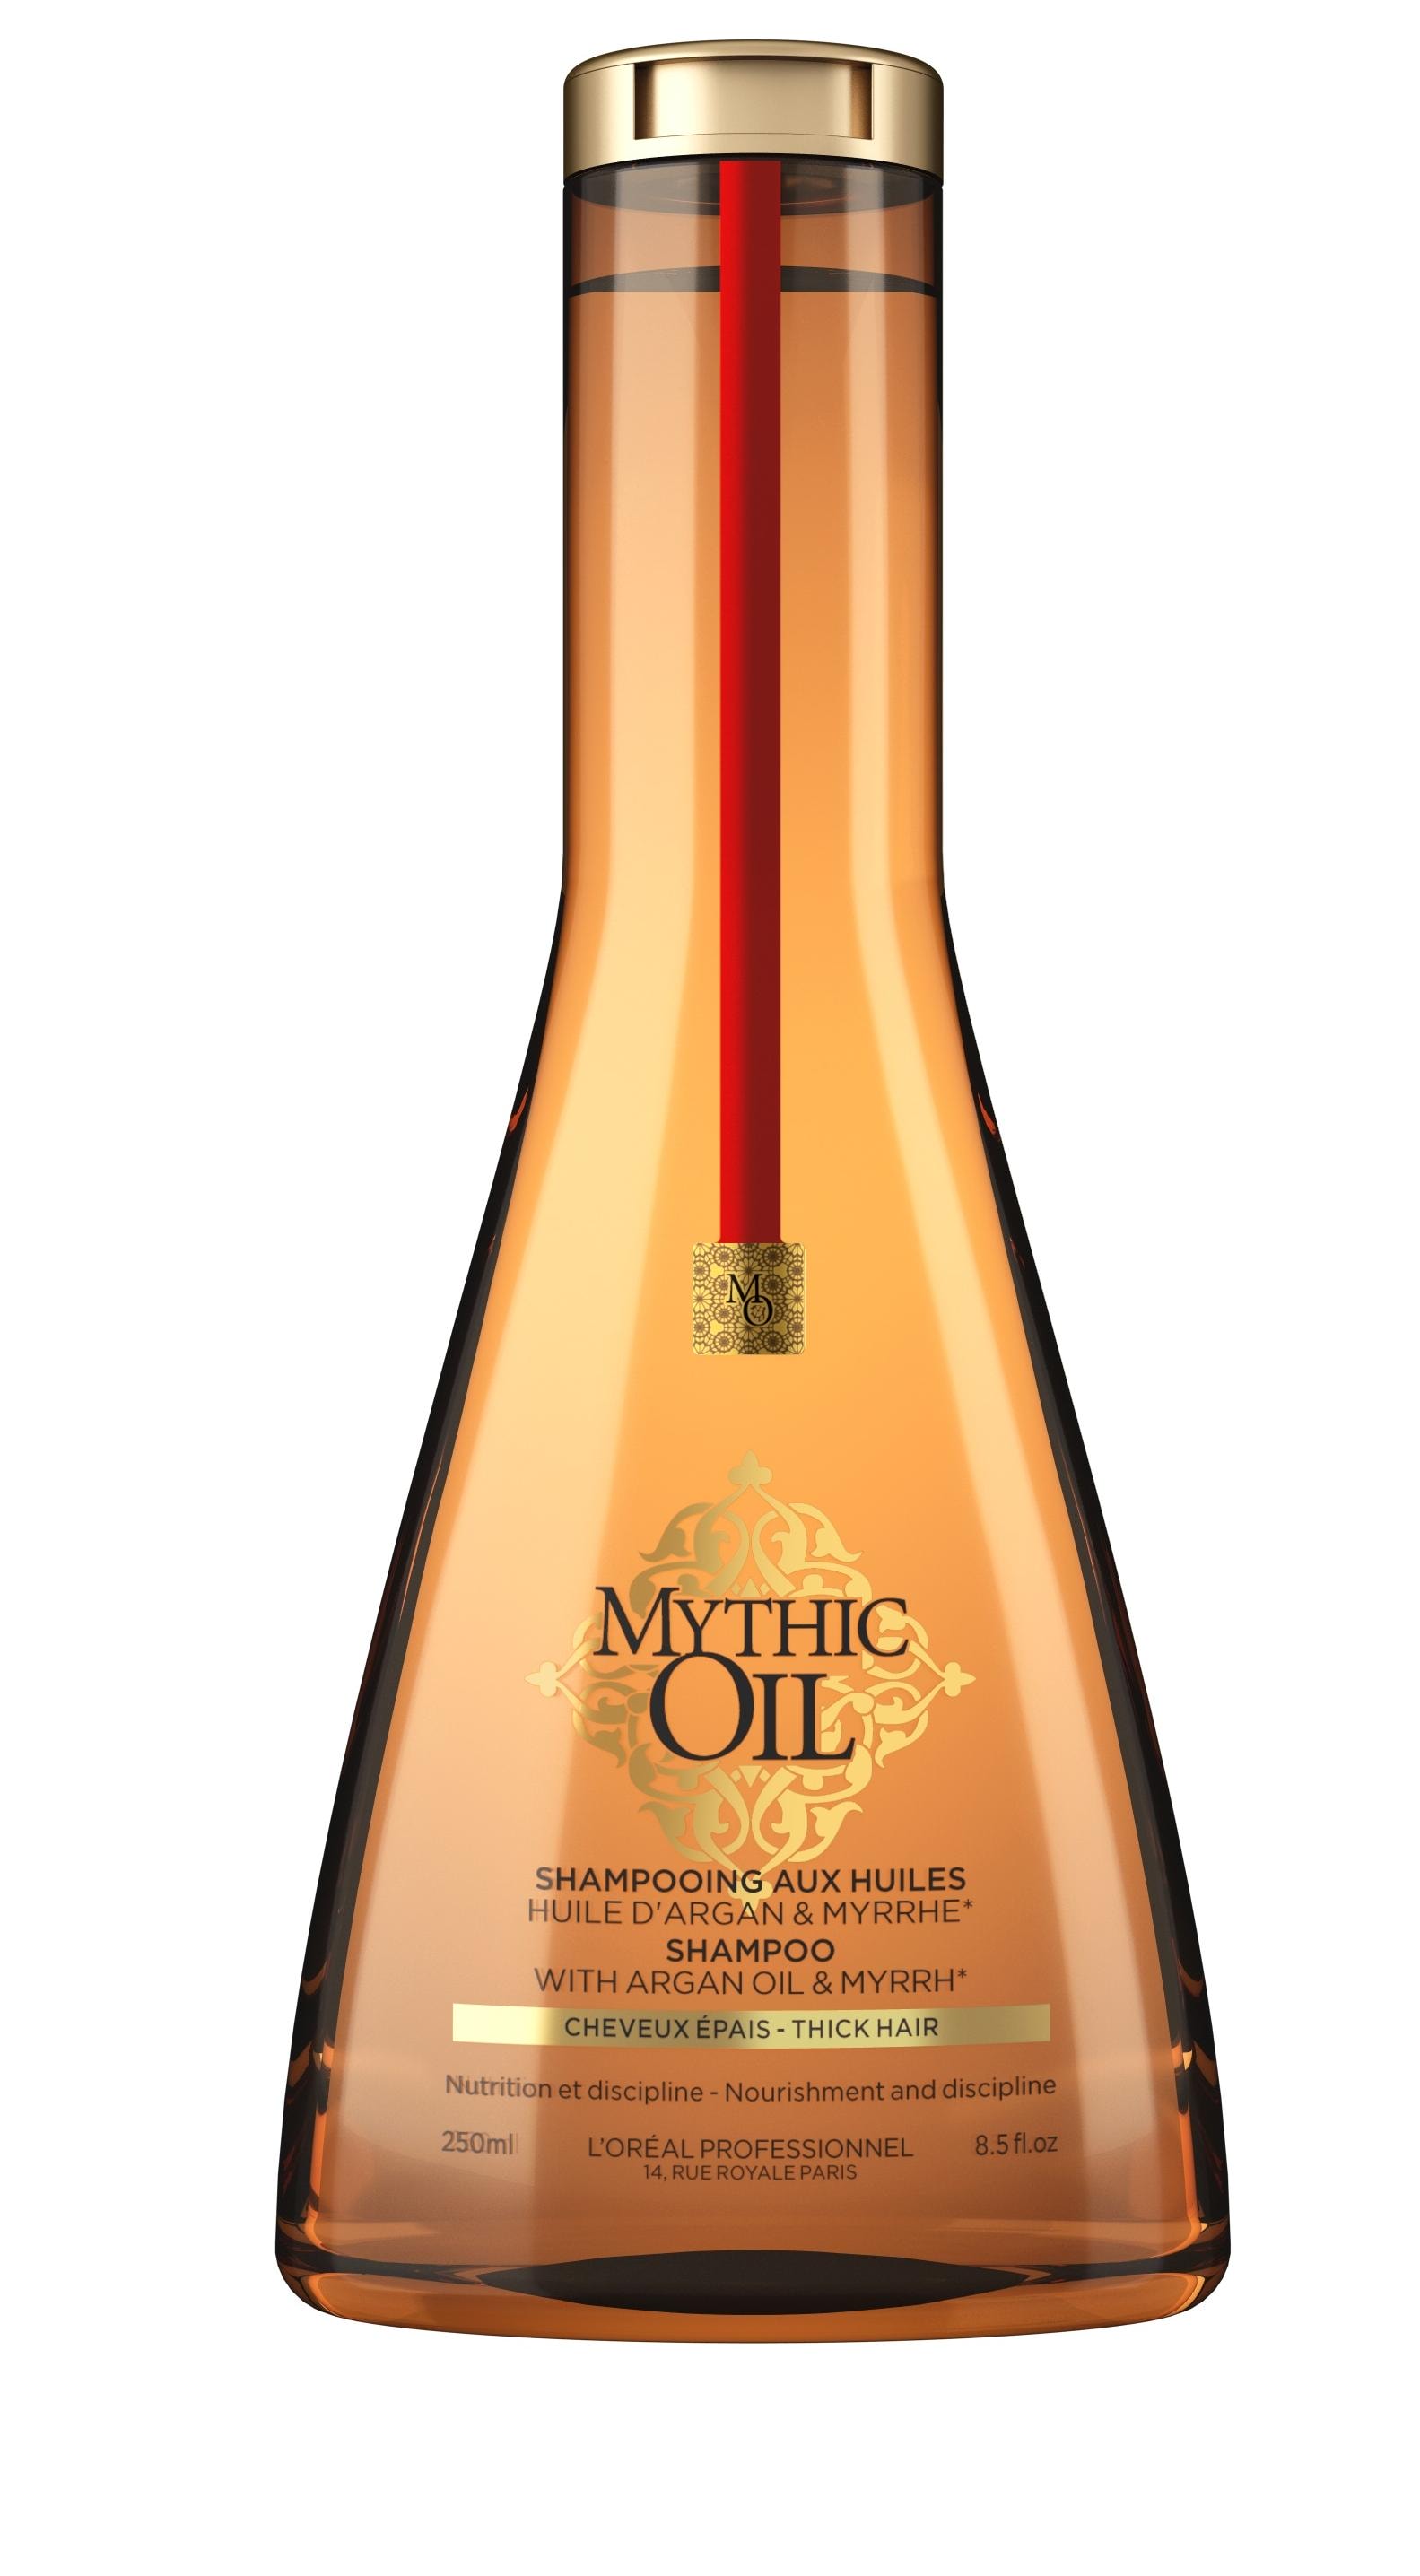 Масло l oreal professionnel. L'Oreal Professionnel Mythic Oil. Масло лореаль Mythic Oil. Лореаль для волос Mythic Oil. Масло Loreal Mythic Oil аргановое масло.